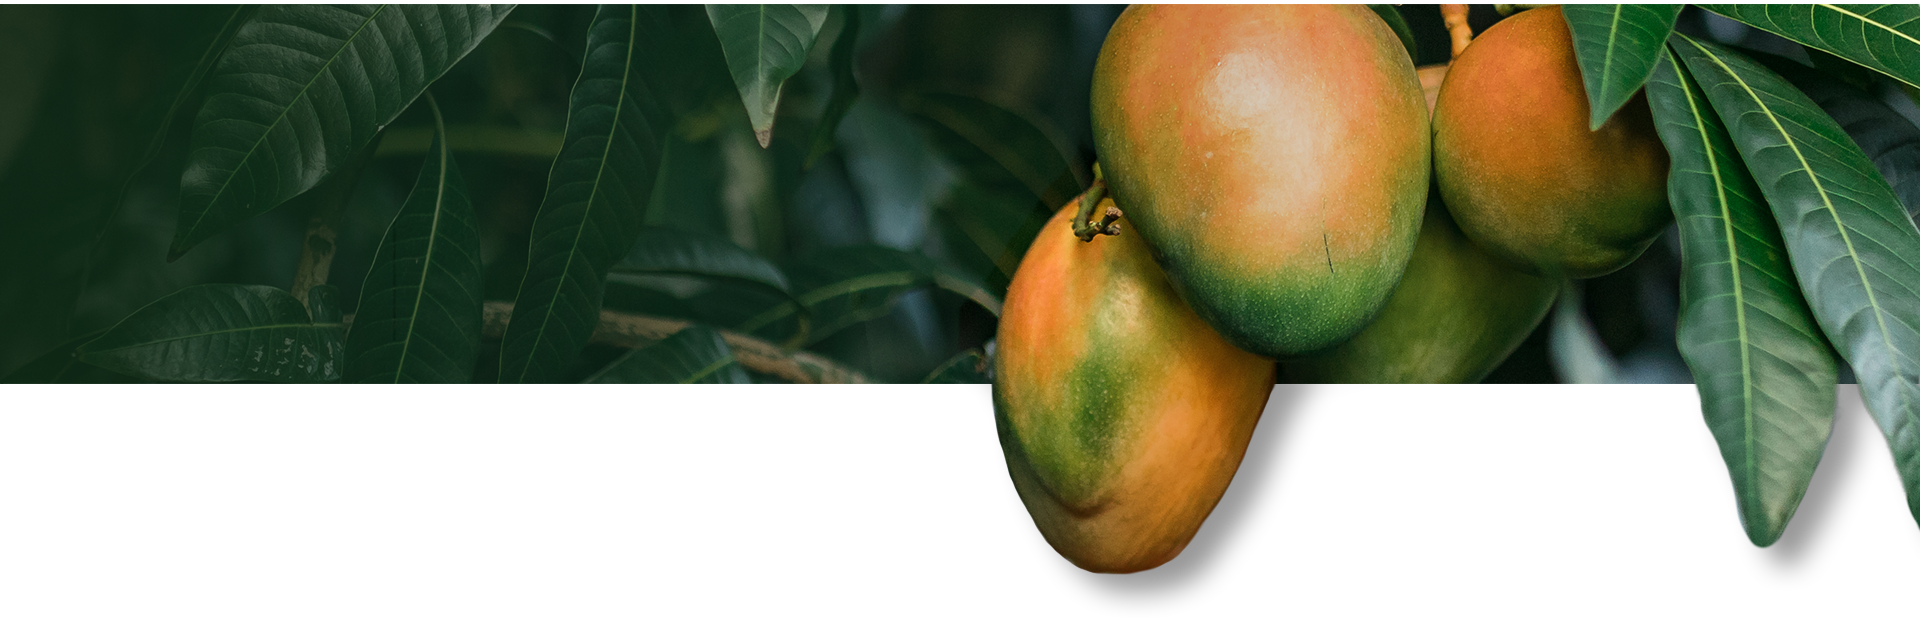 Mango branch with fruit on a leafy background